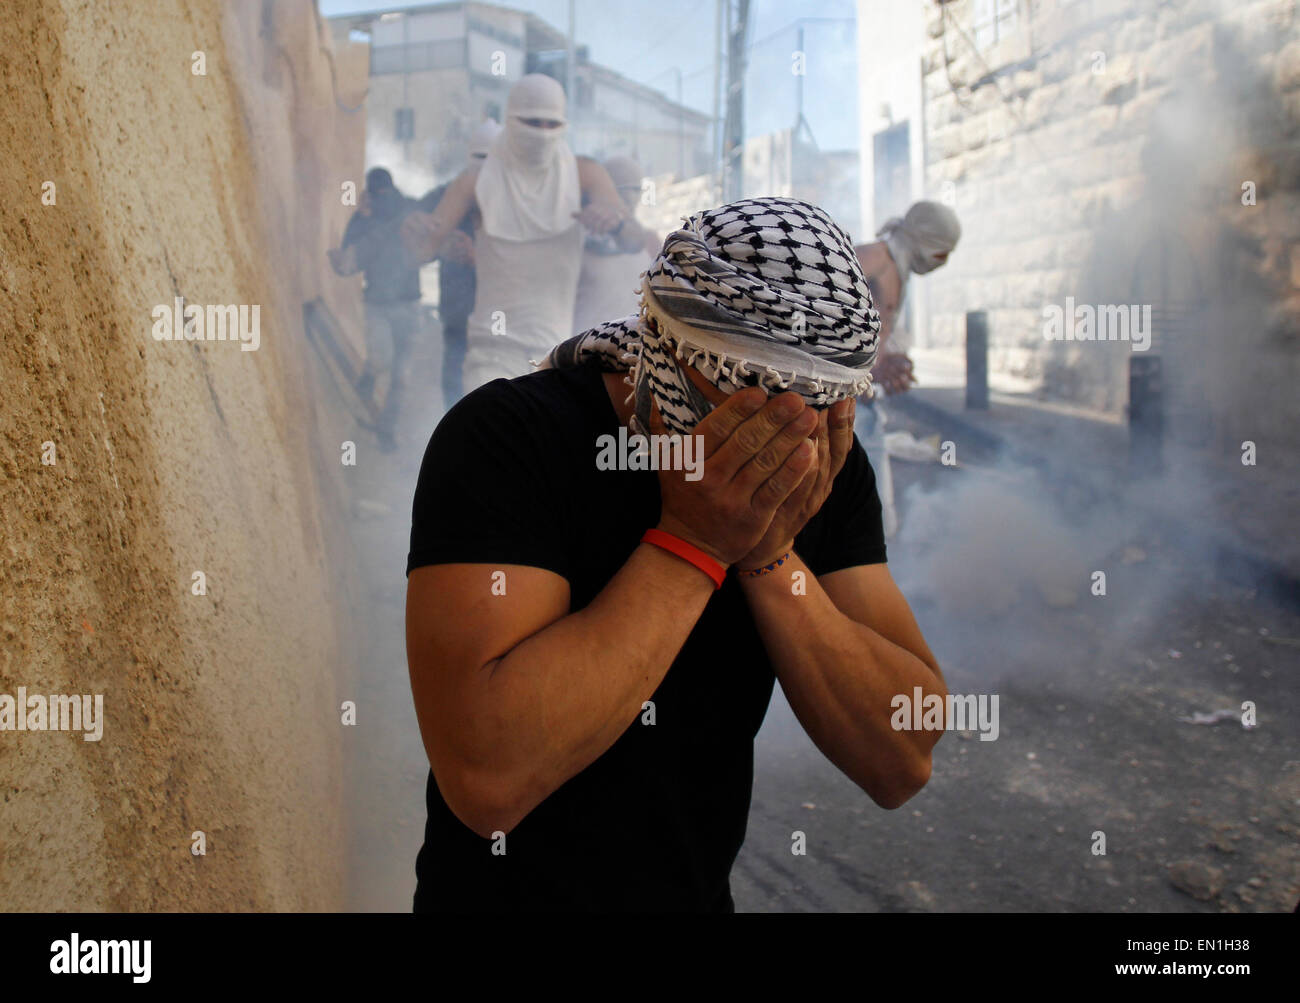 (150425) -- JERUSALEM, April 25, 2015 (Xinhua) -- A masked Palestinian youth covers his face in the tear gas smoke during clashes between Palestinians and Israeli security forces in Al-Tur neighbourhood of East Jerusalem, on April 25, 2015. Israeli paramilitary Border Police said Saturday that it shot dead a knife-wielding Palestinian youth near an east Jerusalem checkpoint after he attempted to attack them. Ali Said Abu Ghanam, a 16-year-old resident of the Palestinian neighborhood of At-Tur, started running toward the policemen at the A-Zayyim checkpoint Friday overnight, according to a poli Stock Photo